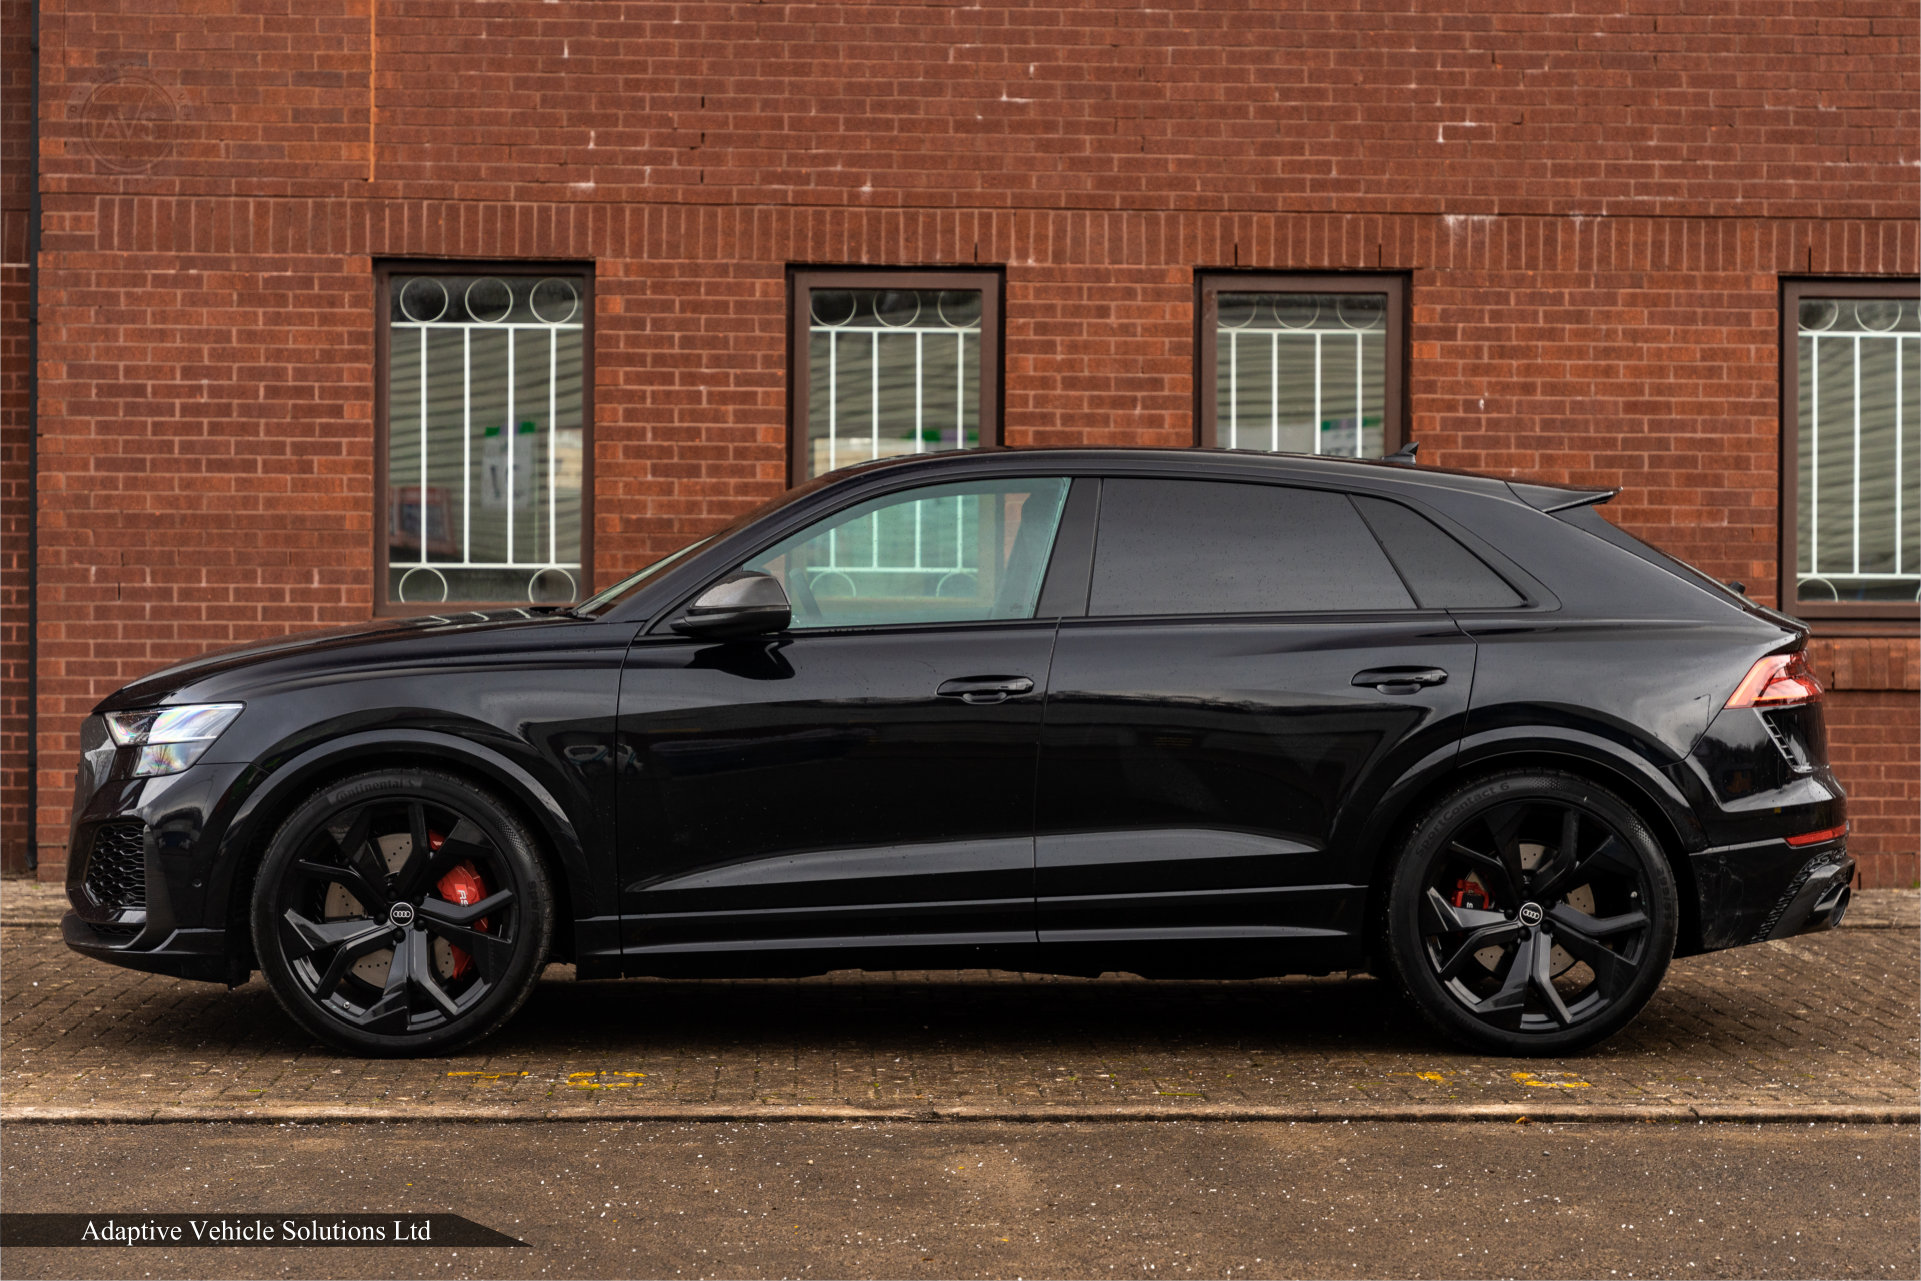 2021 Audi RSQ8 Carbon Edition Black with Black near side view